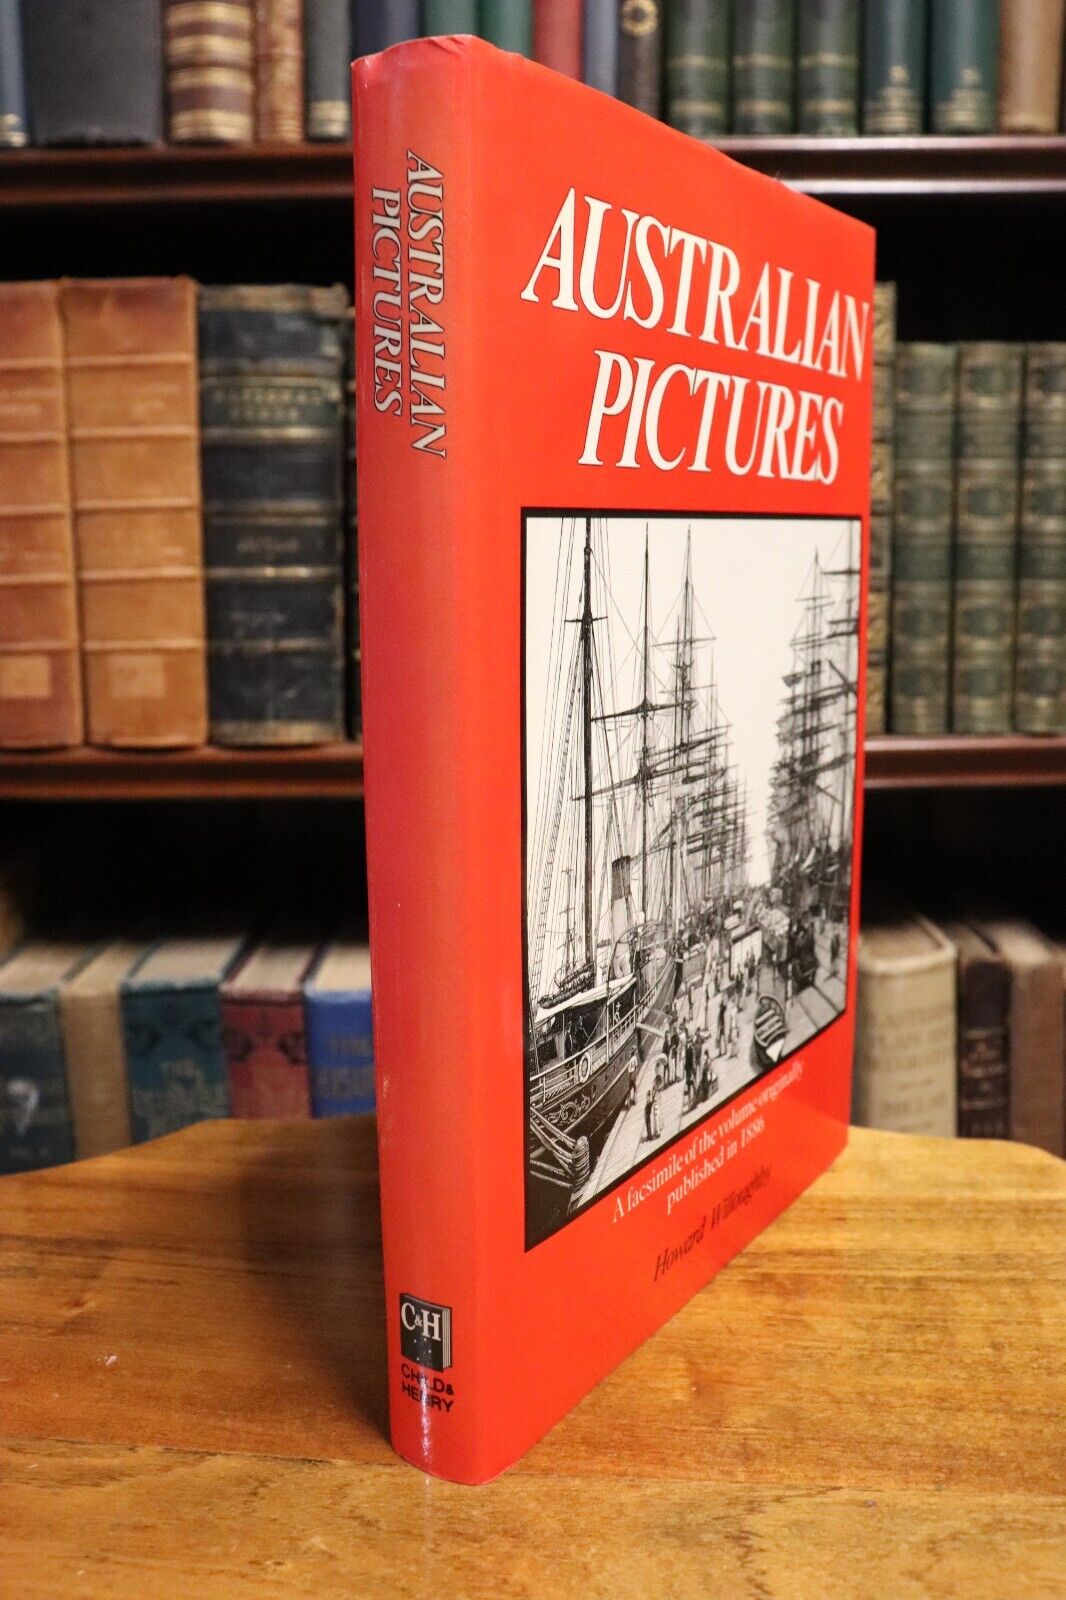 Australian Pictures Drawn With Pen & Pencil - 1985 - Australian History Book